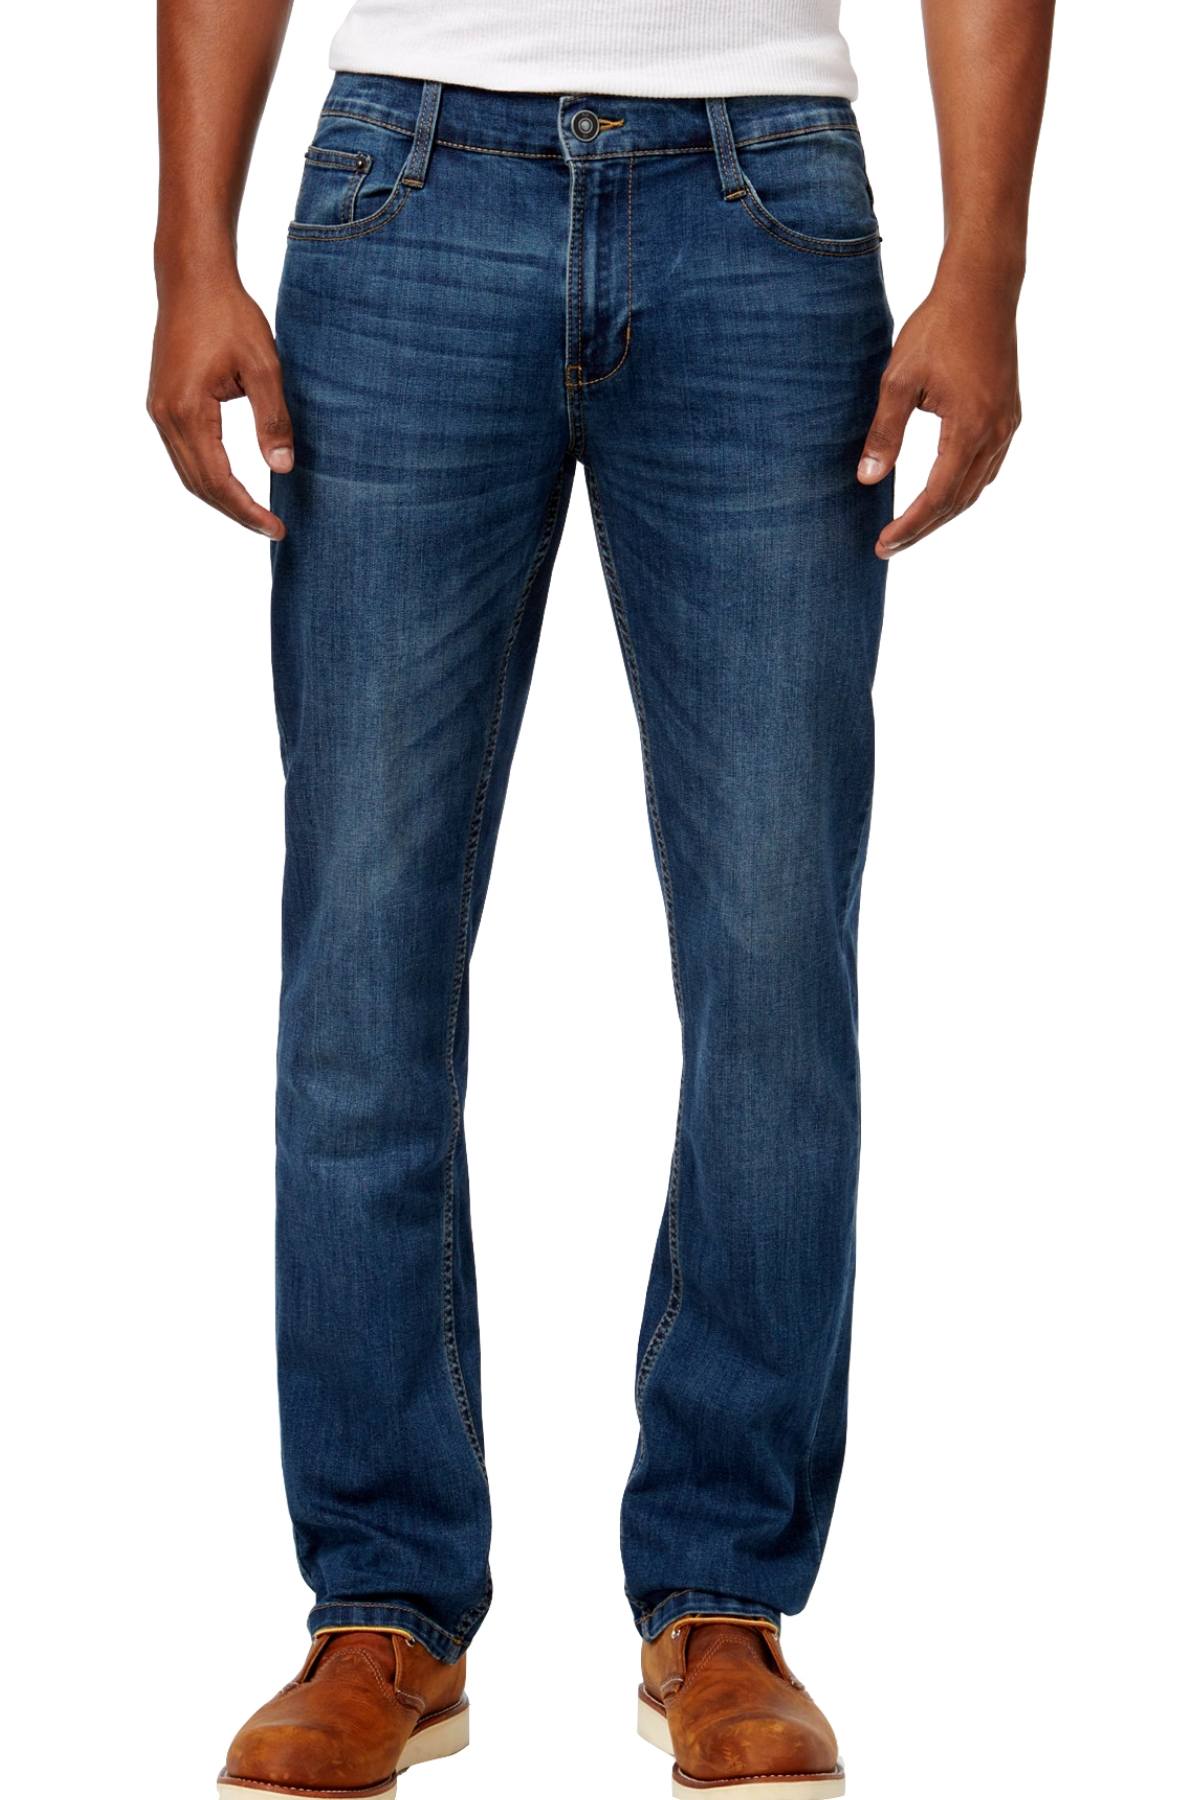 Ring of Fire City-Wash Straight-Fit Relic Jeans | CheapUndies